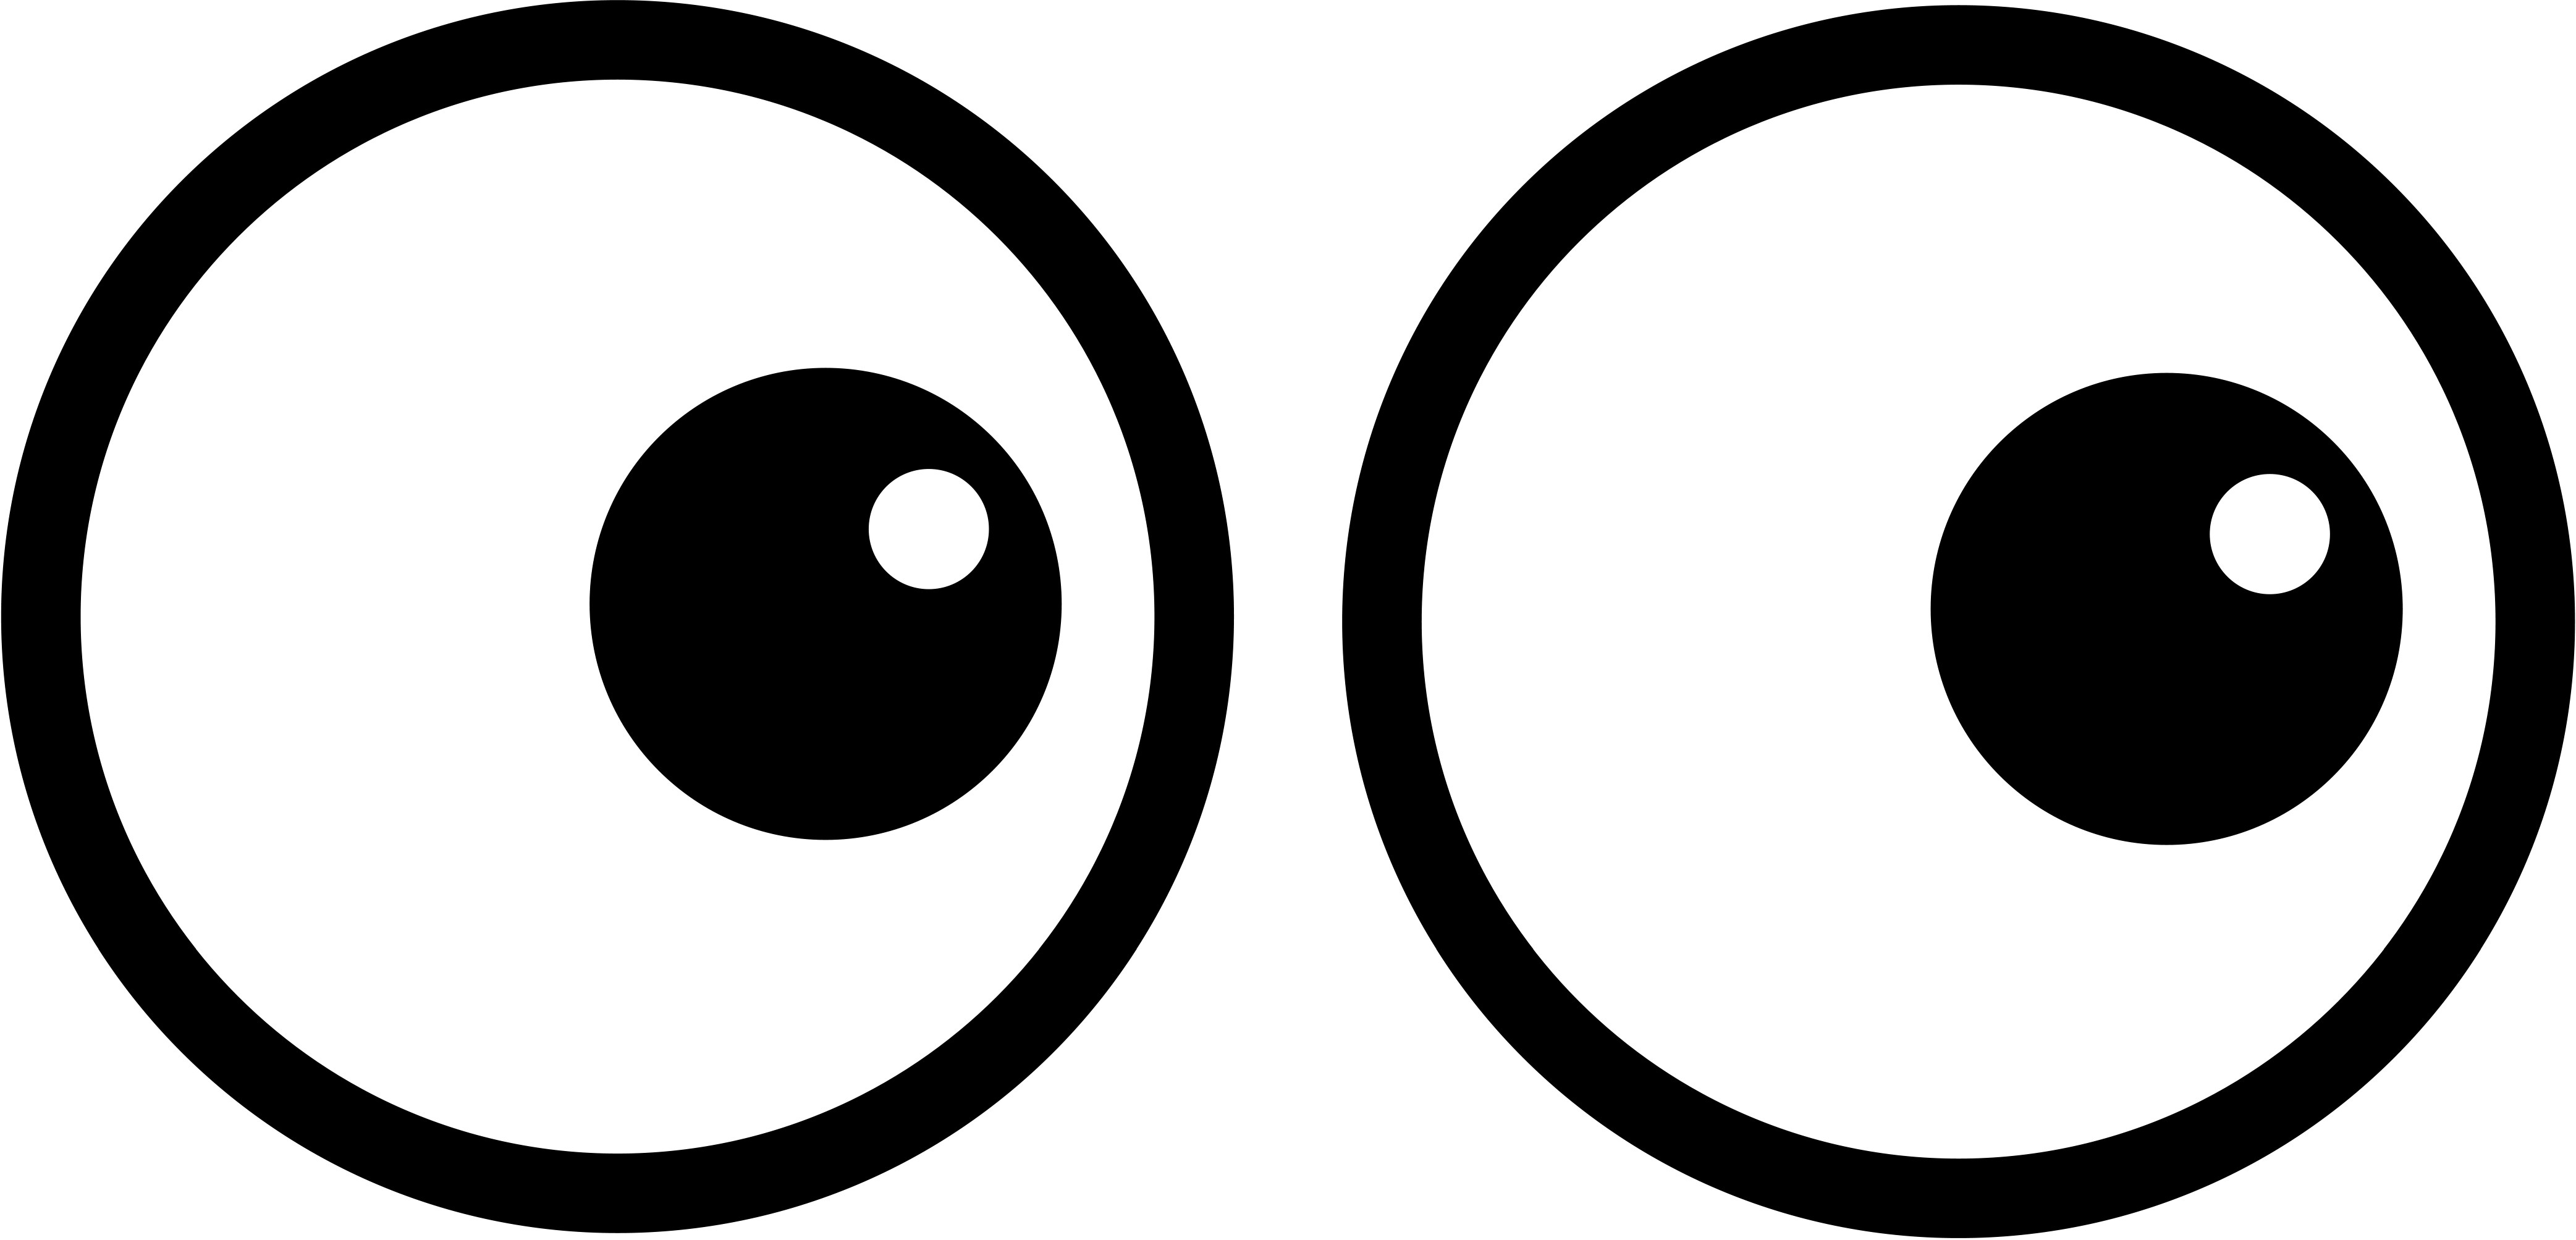 Googly eyes glasses clipart